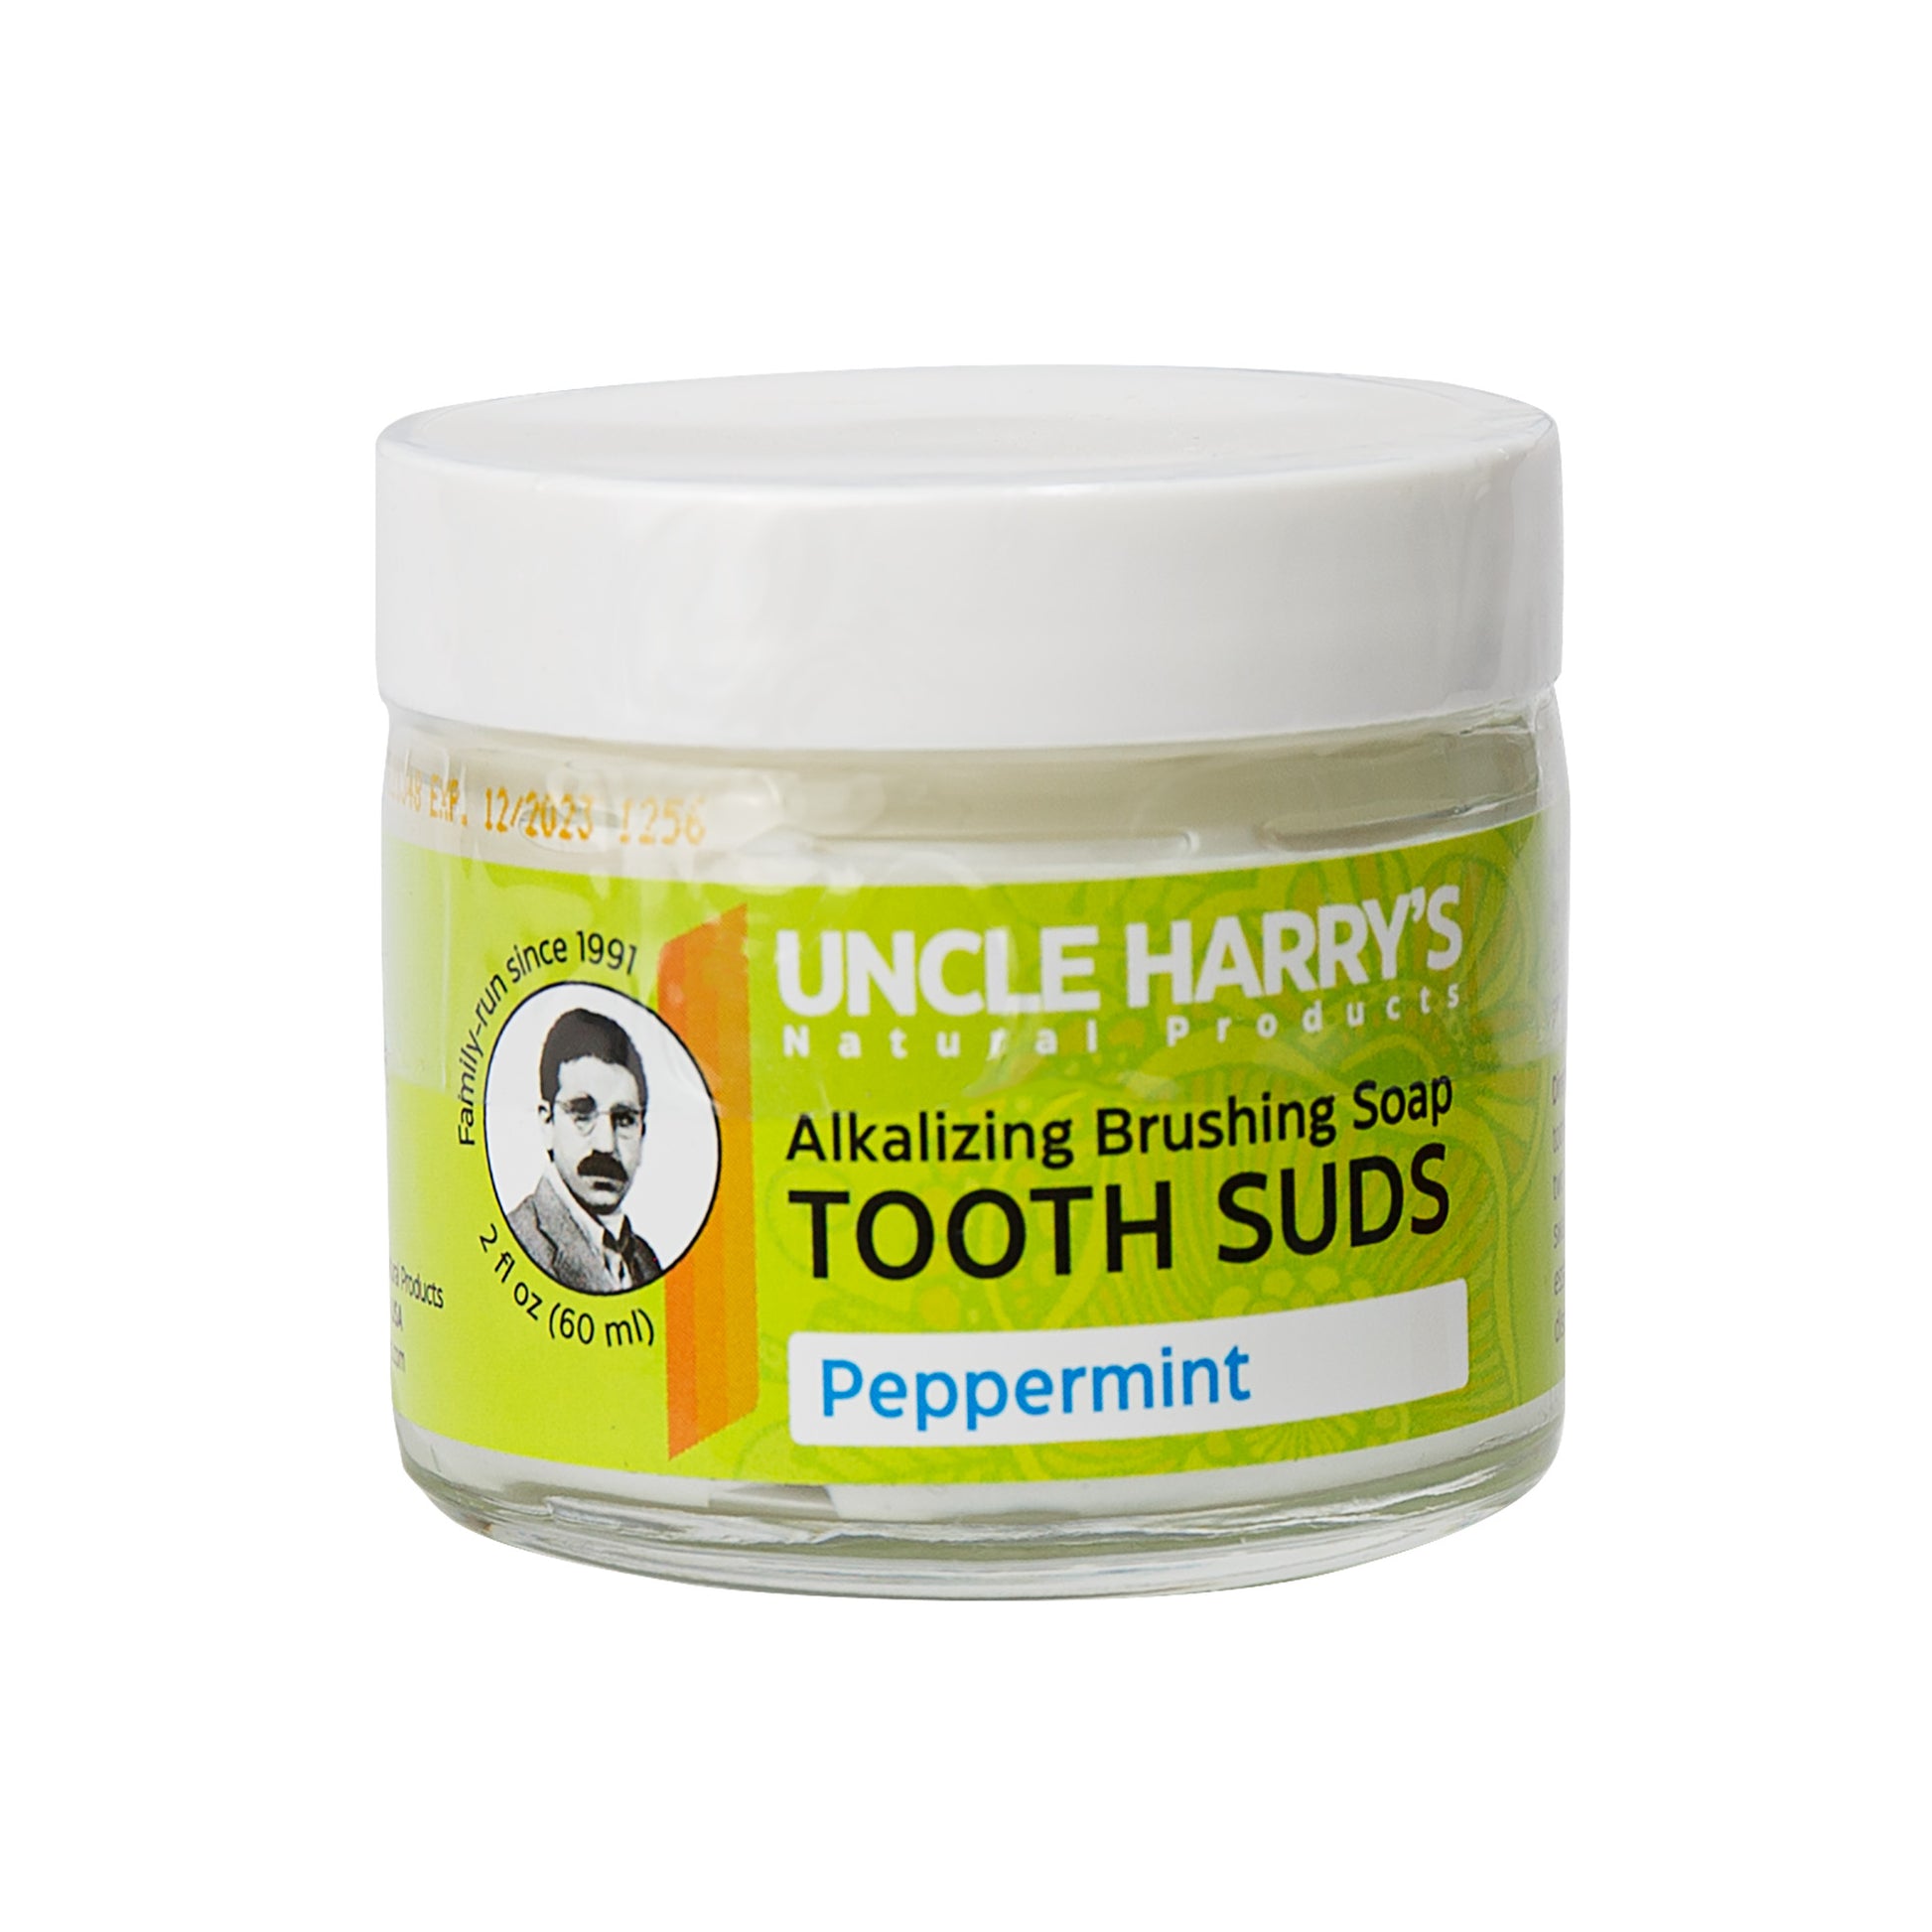 Primary image of Peppermint Brushing Soap Tooth Suds